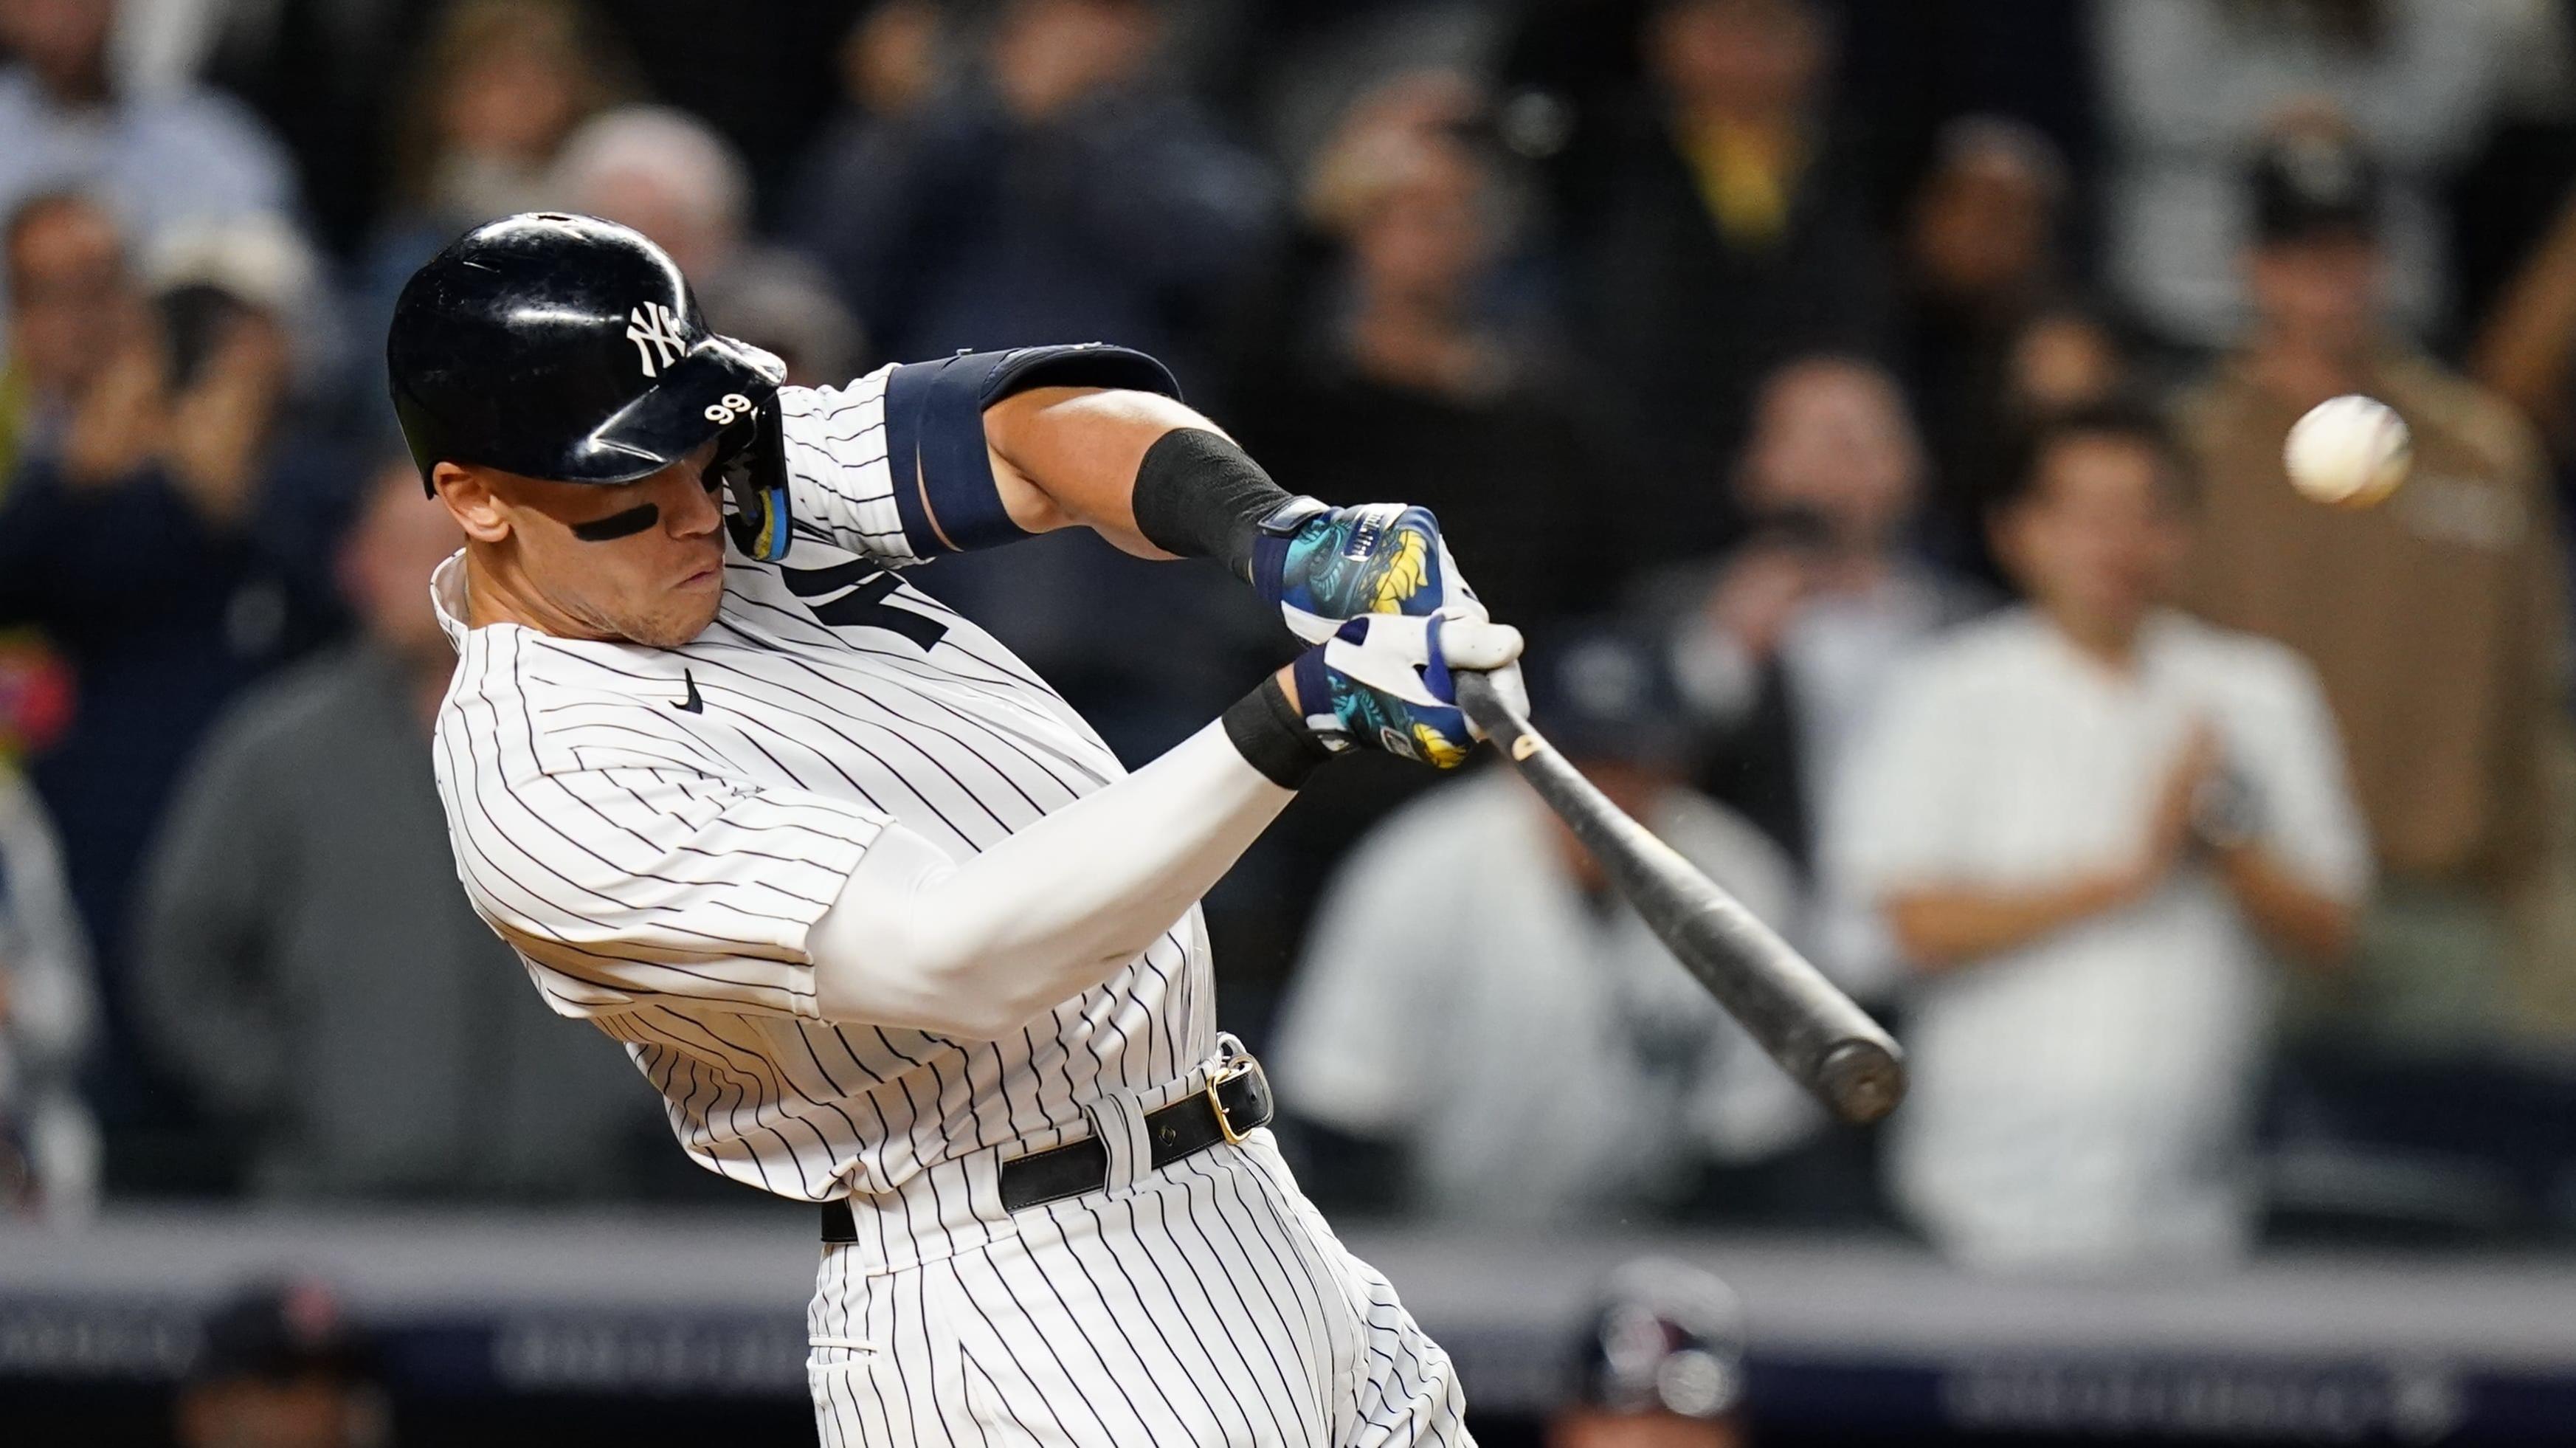 Yankees' Aaron Judge is (still) chasing Roger Maris. Has the wait